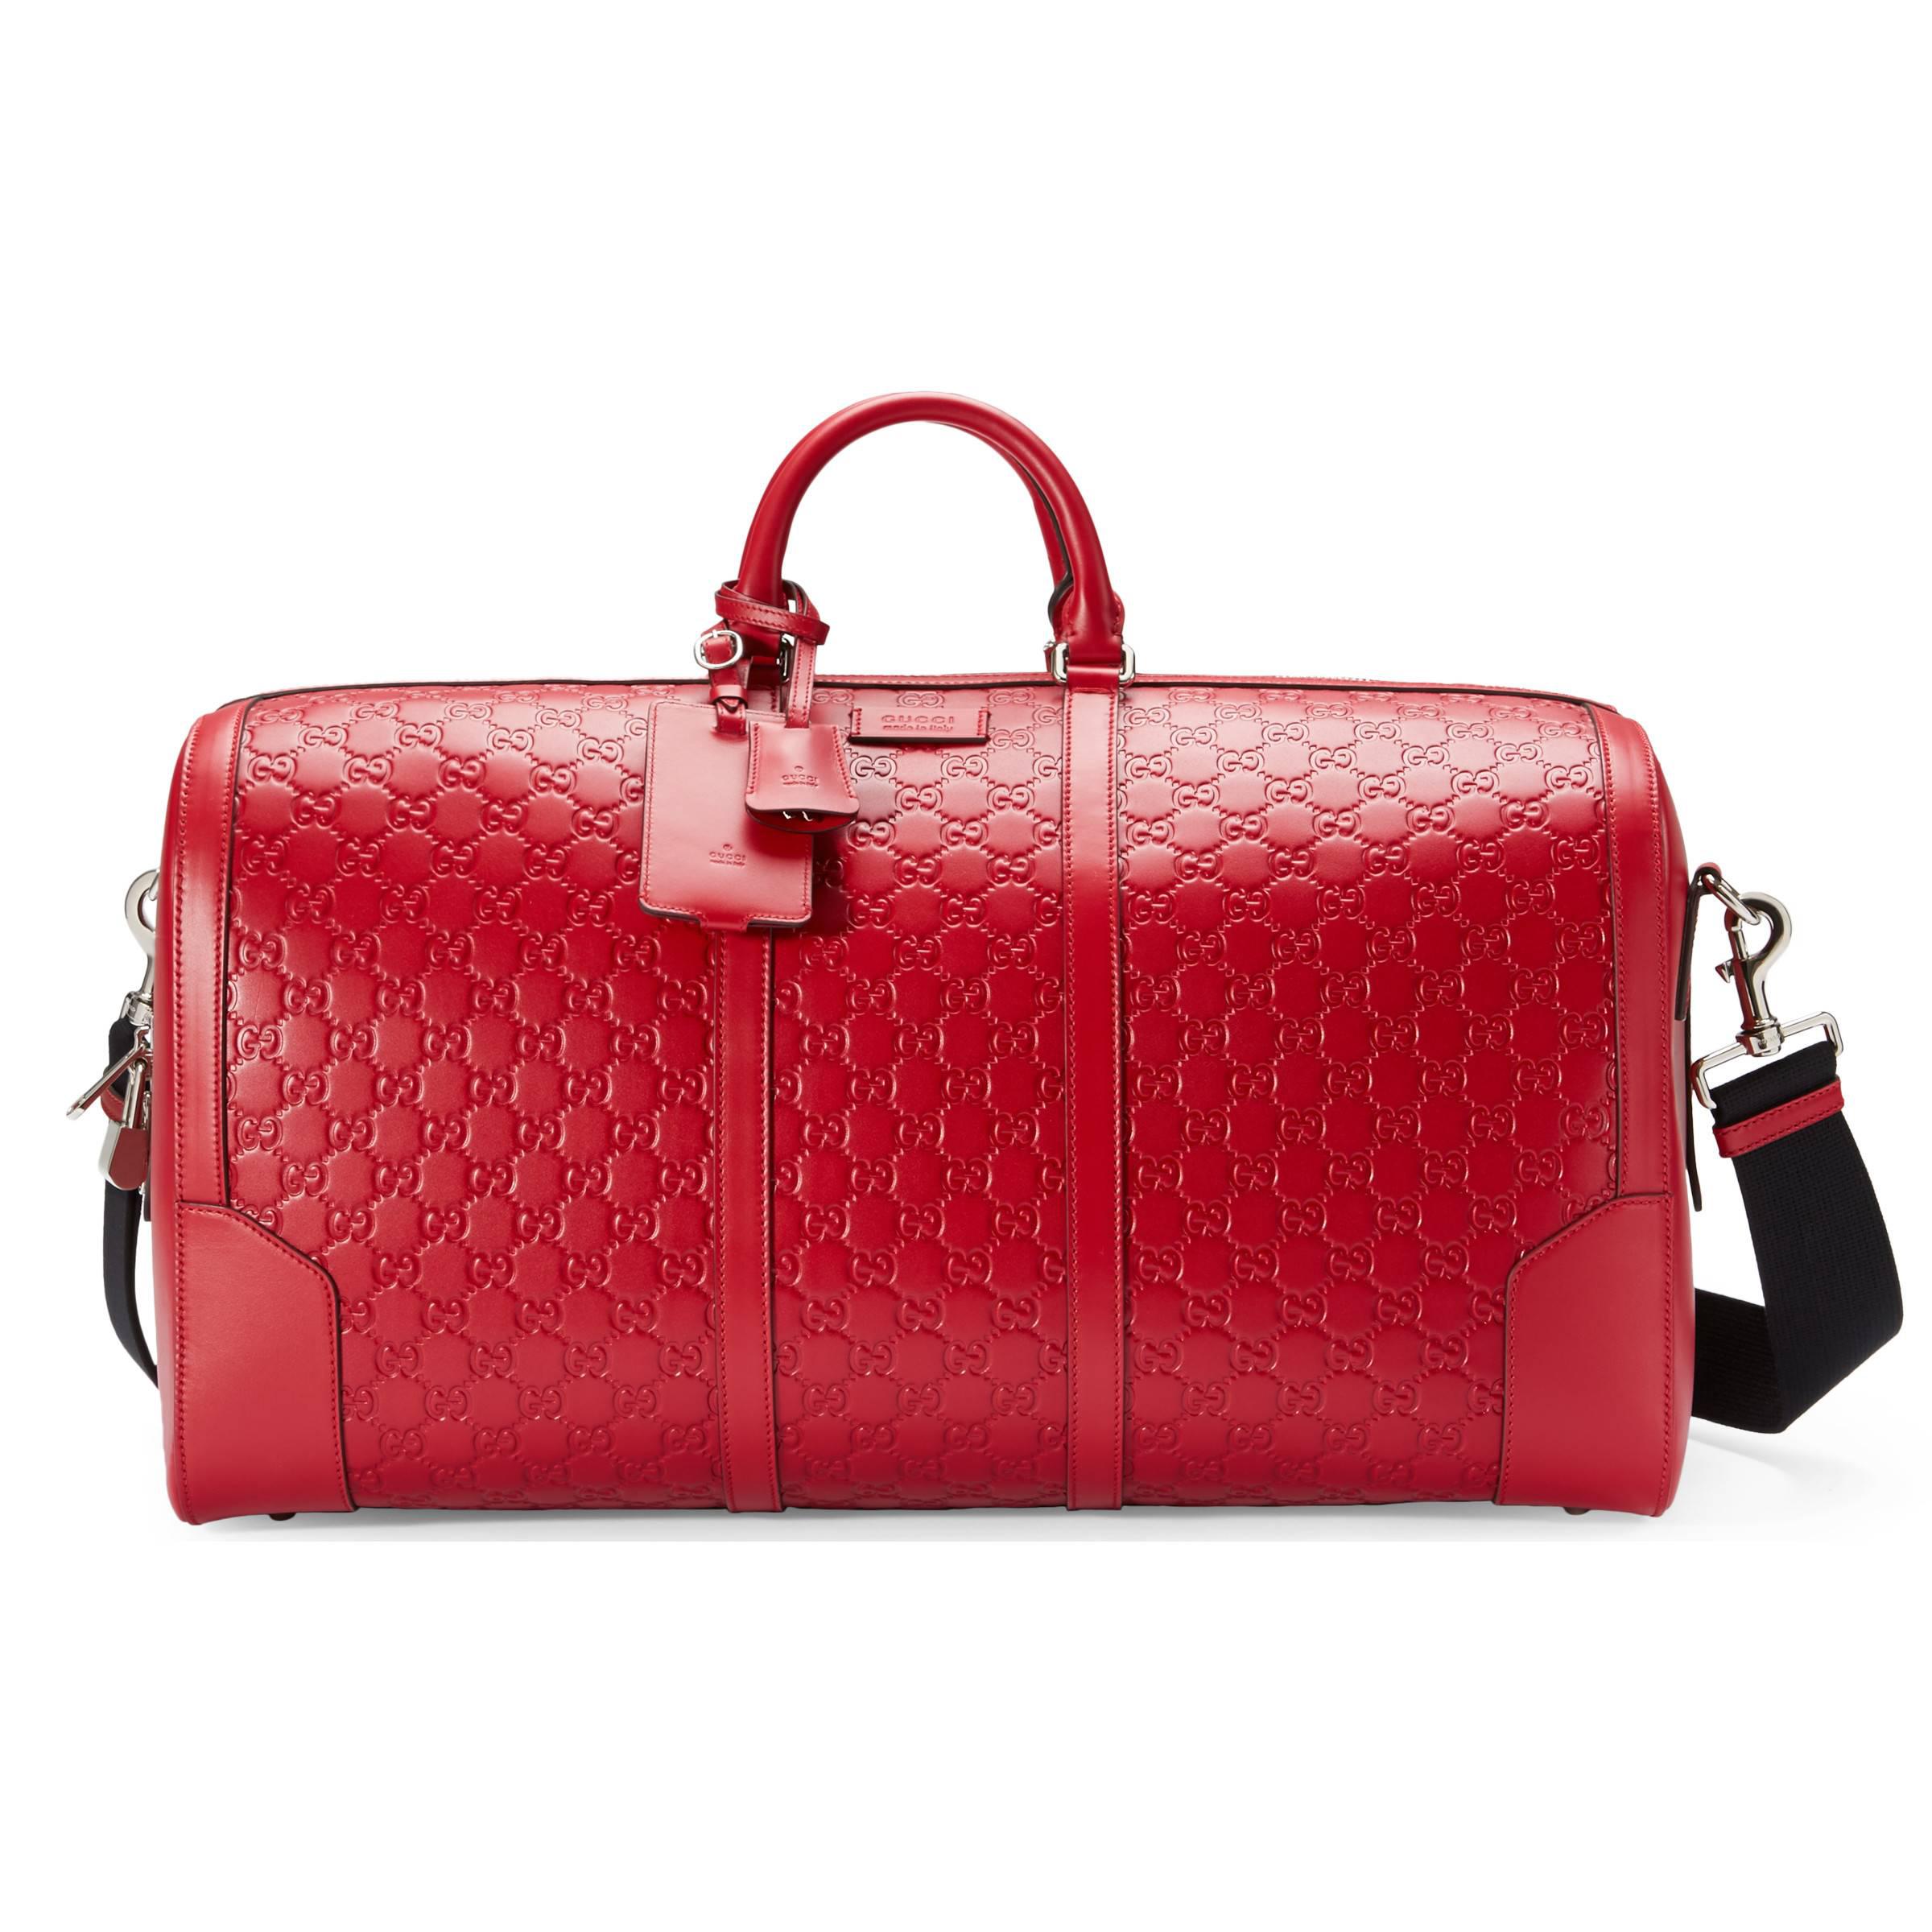 red gucci duffle